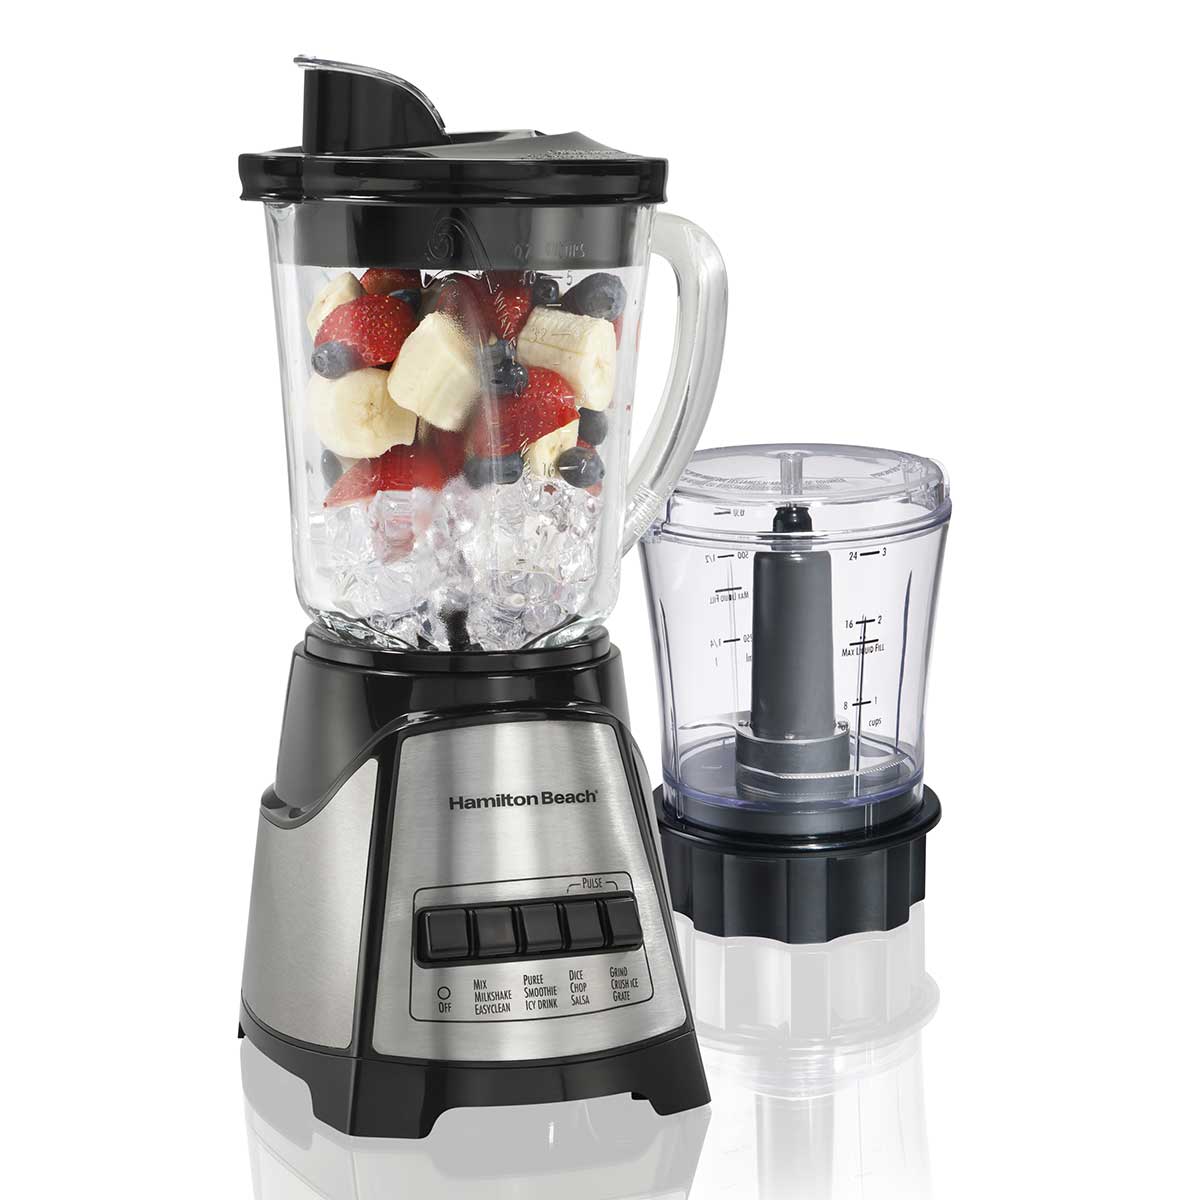 12 Function Blender & Chopper with Mess-free 40oz Glass Jar, 700W Black & Stainless (58149G)